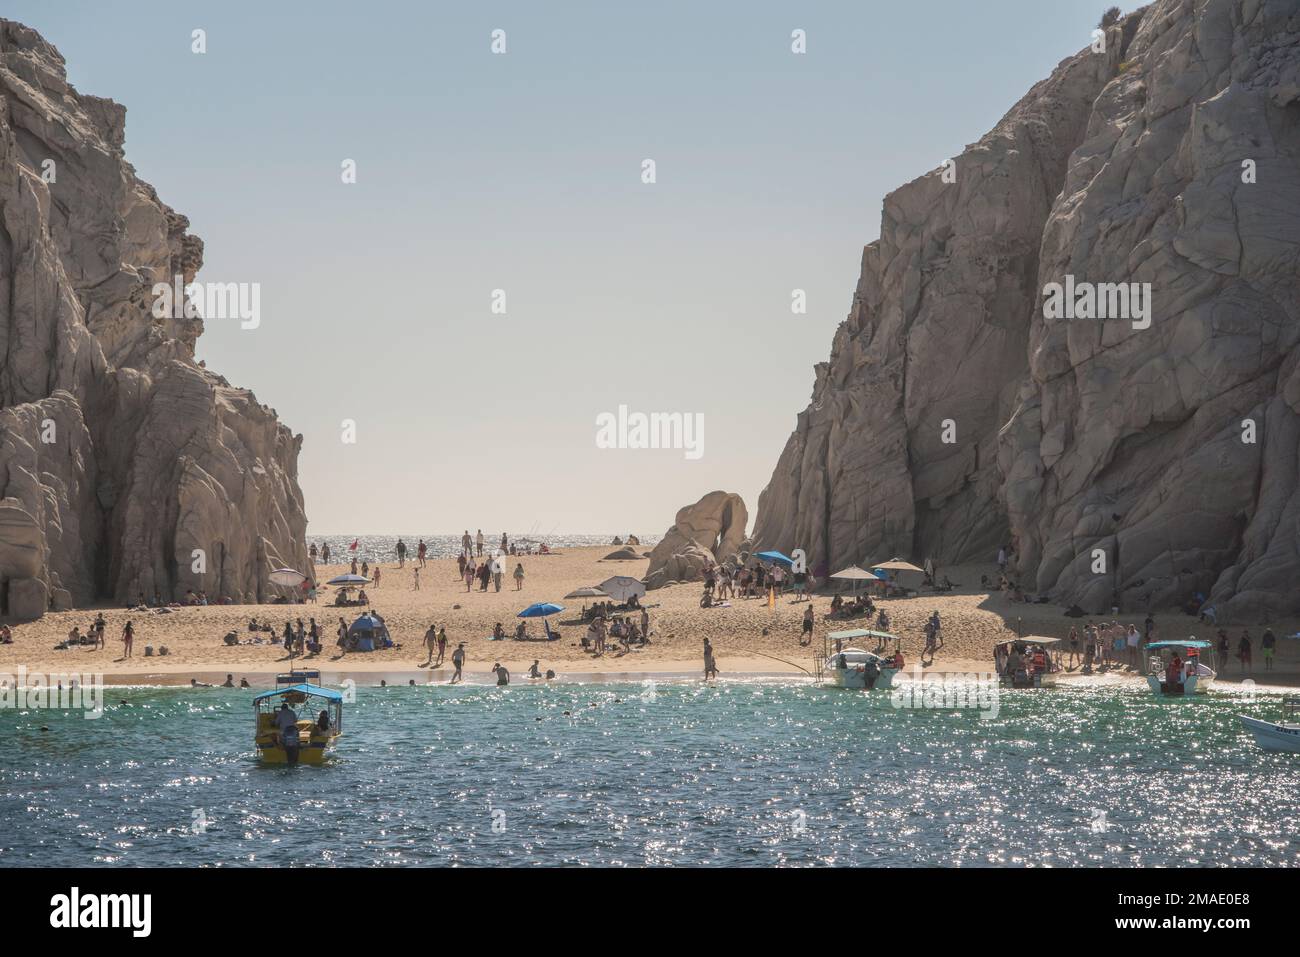 Lover's Beach, Cabo San Lucas, Mexican Riviera, Mexico is popular because it is on both the Sea of Cortez and the Pacific Ocean, just yards apart. Stock Photo